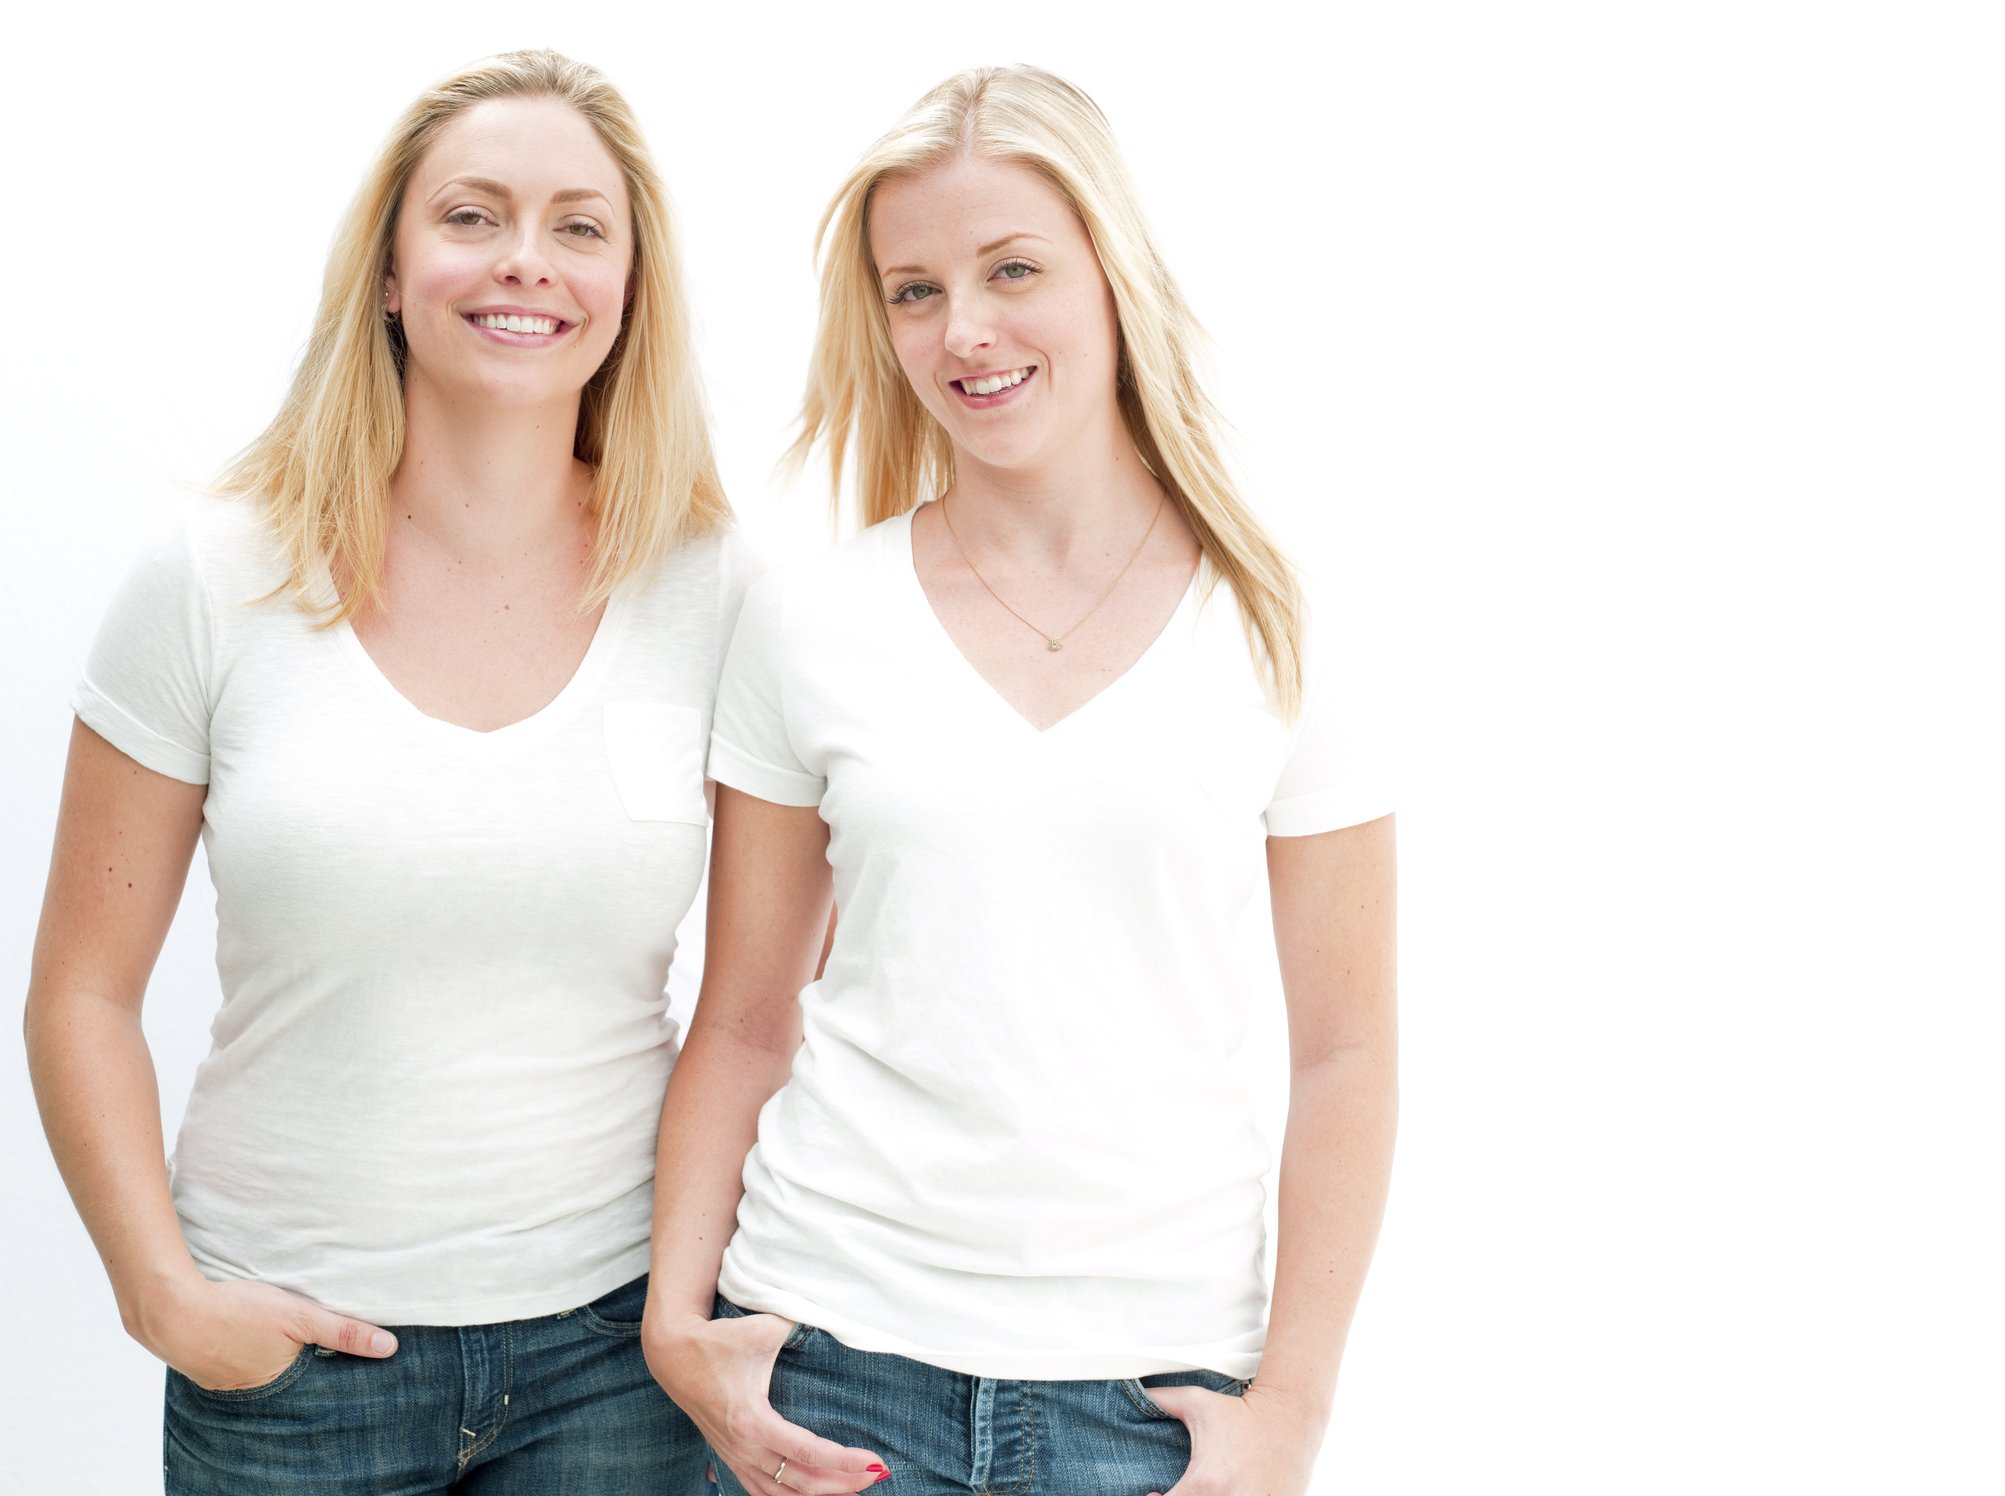 Portrait of two blondes in white T-shirts smiling. | Photo: Getty Images